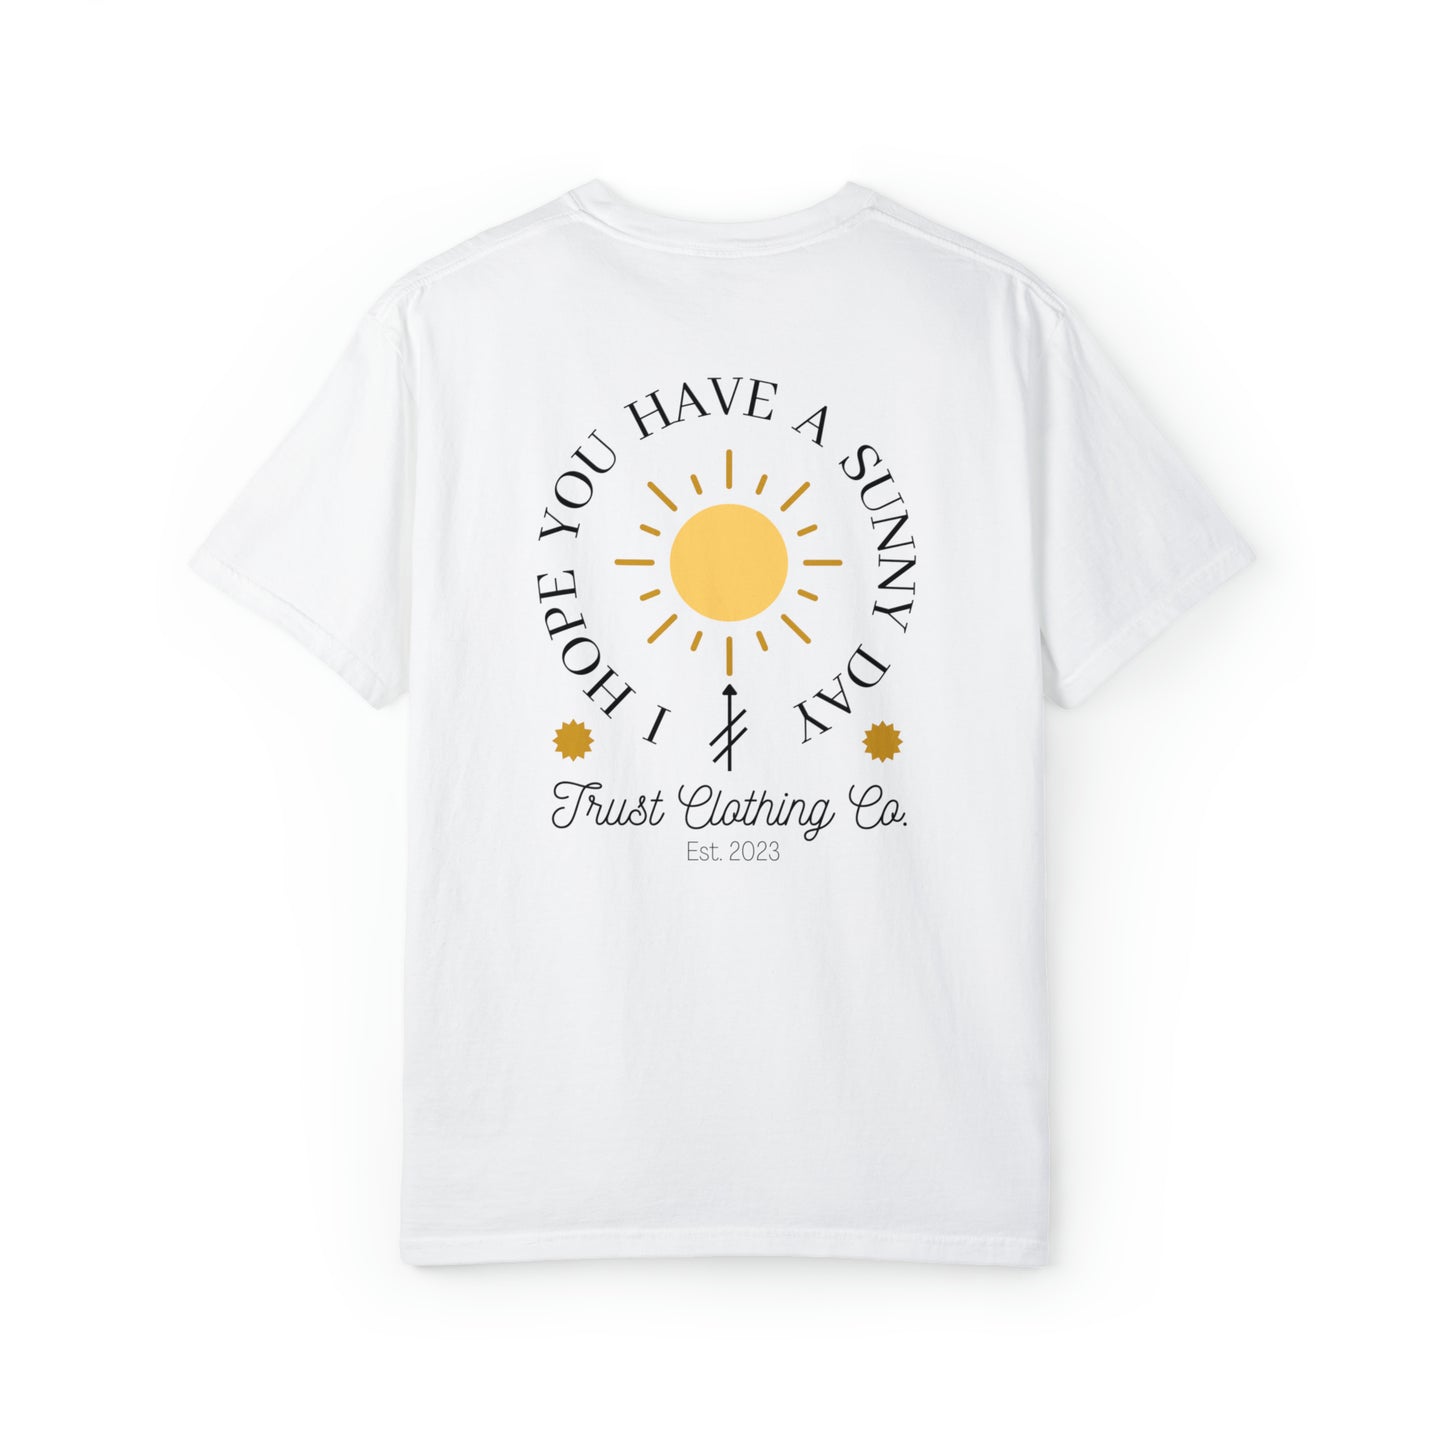 Trust Clothing Co. / Sunny Day